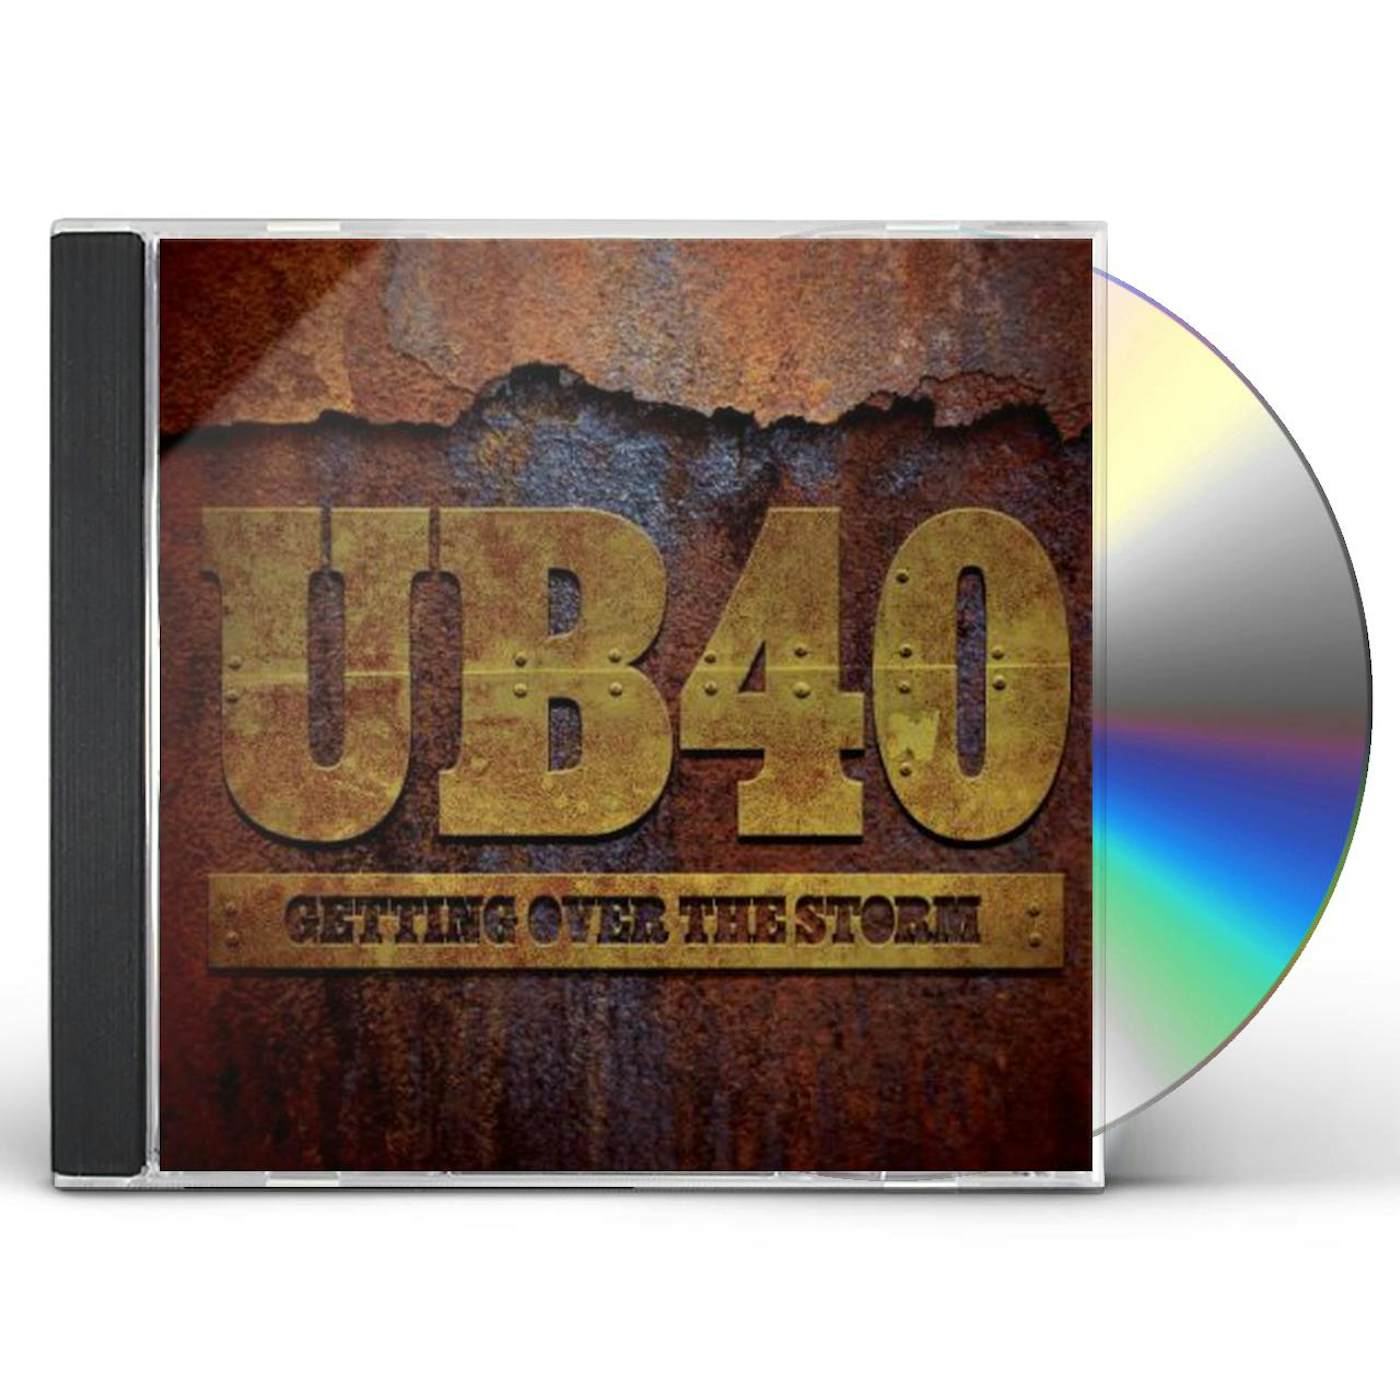 UB40 GETTING OVER THE STORM CD